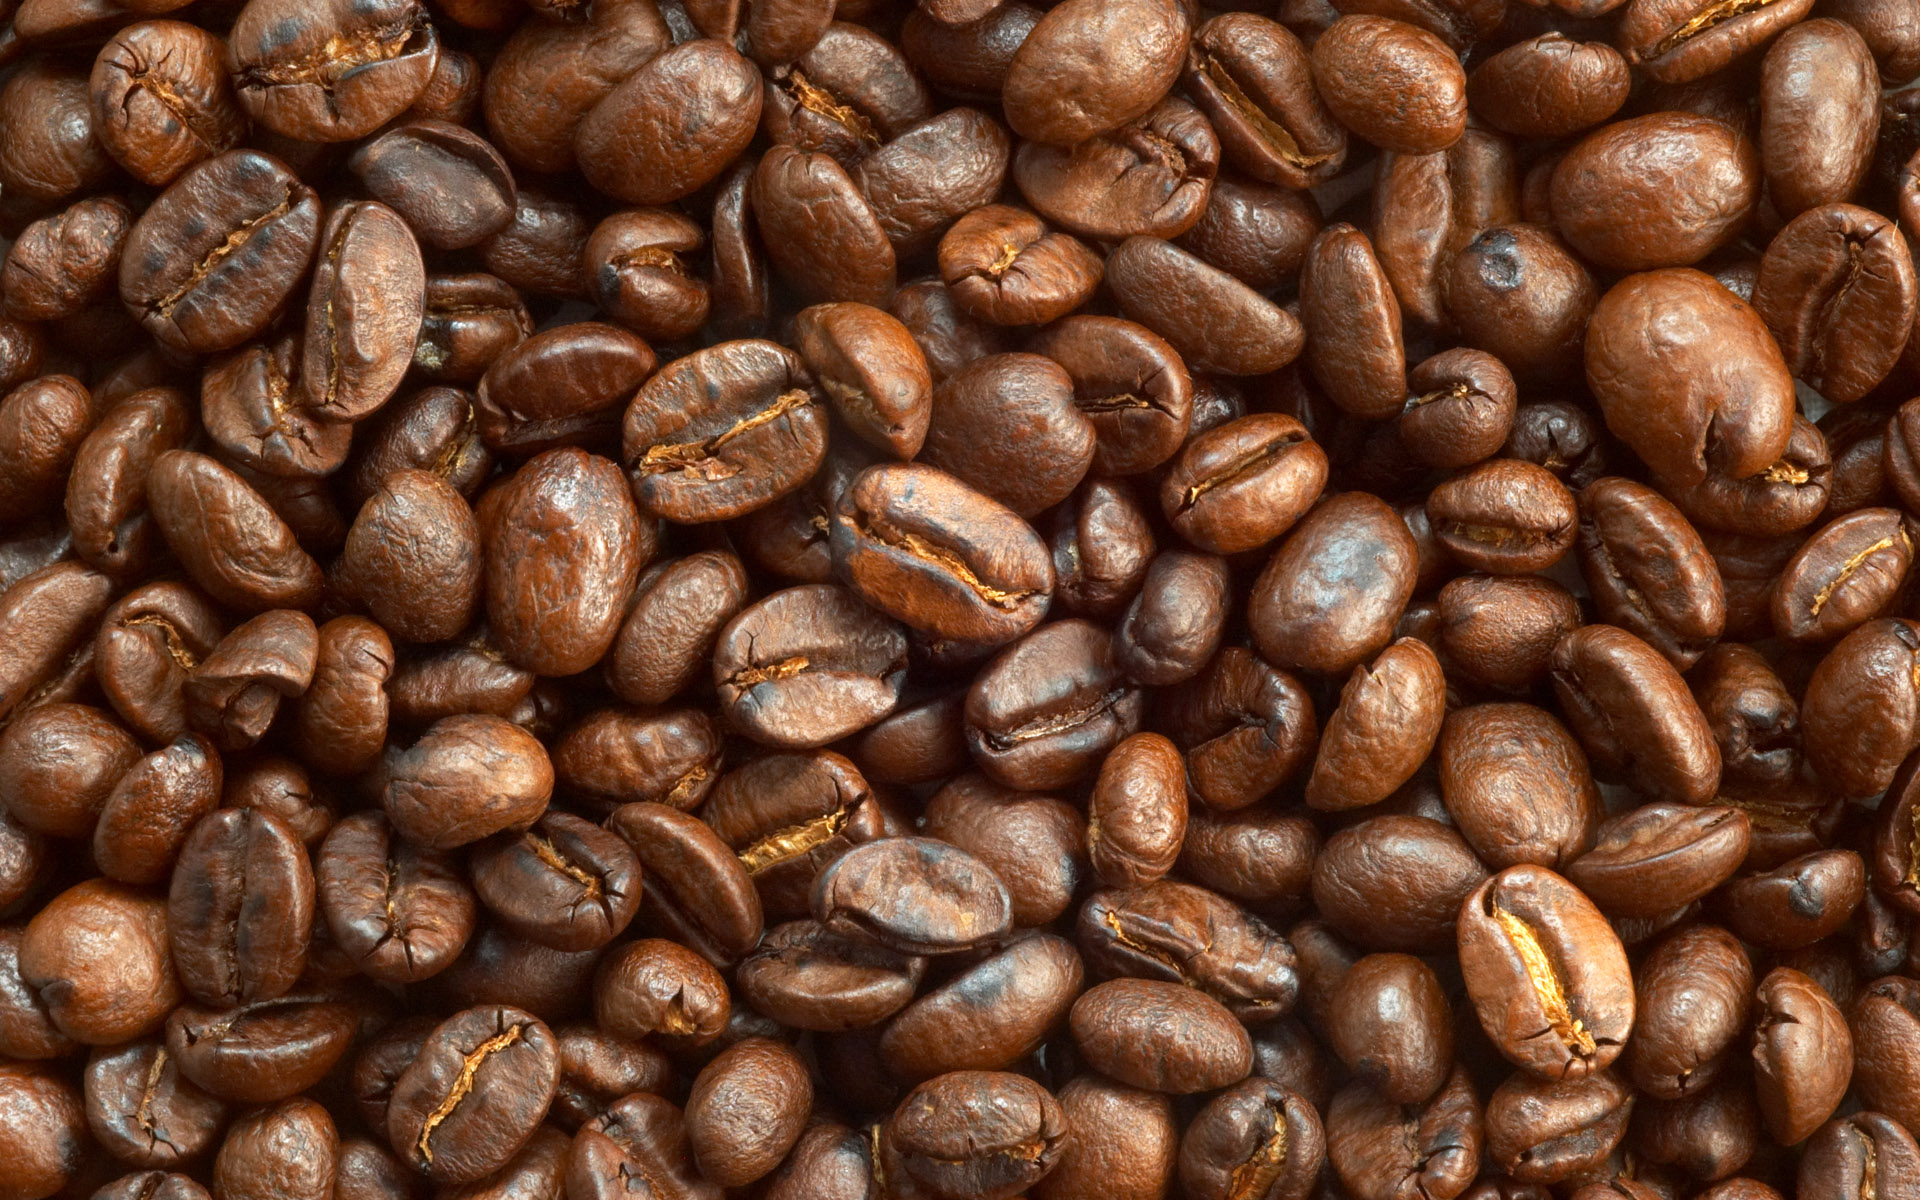 Coffee beans aren't beans. They are seeds.